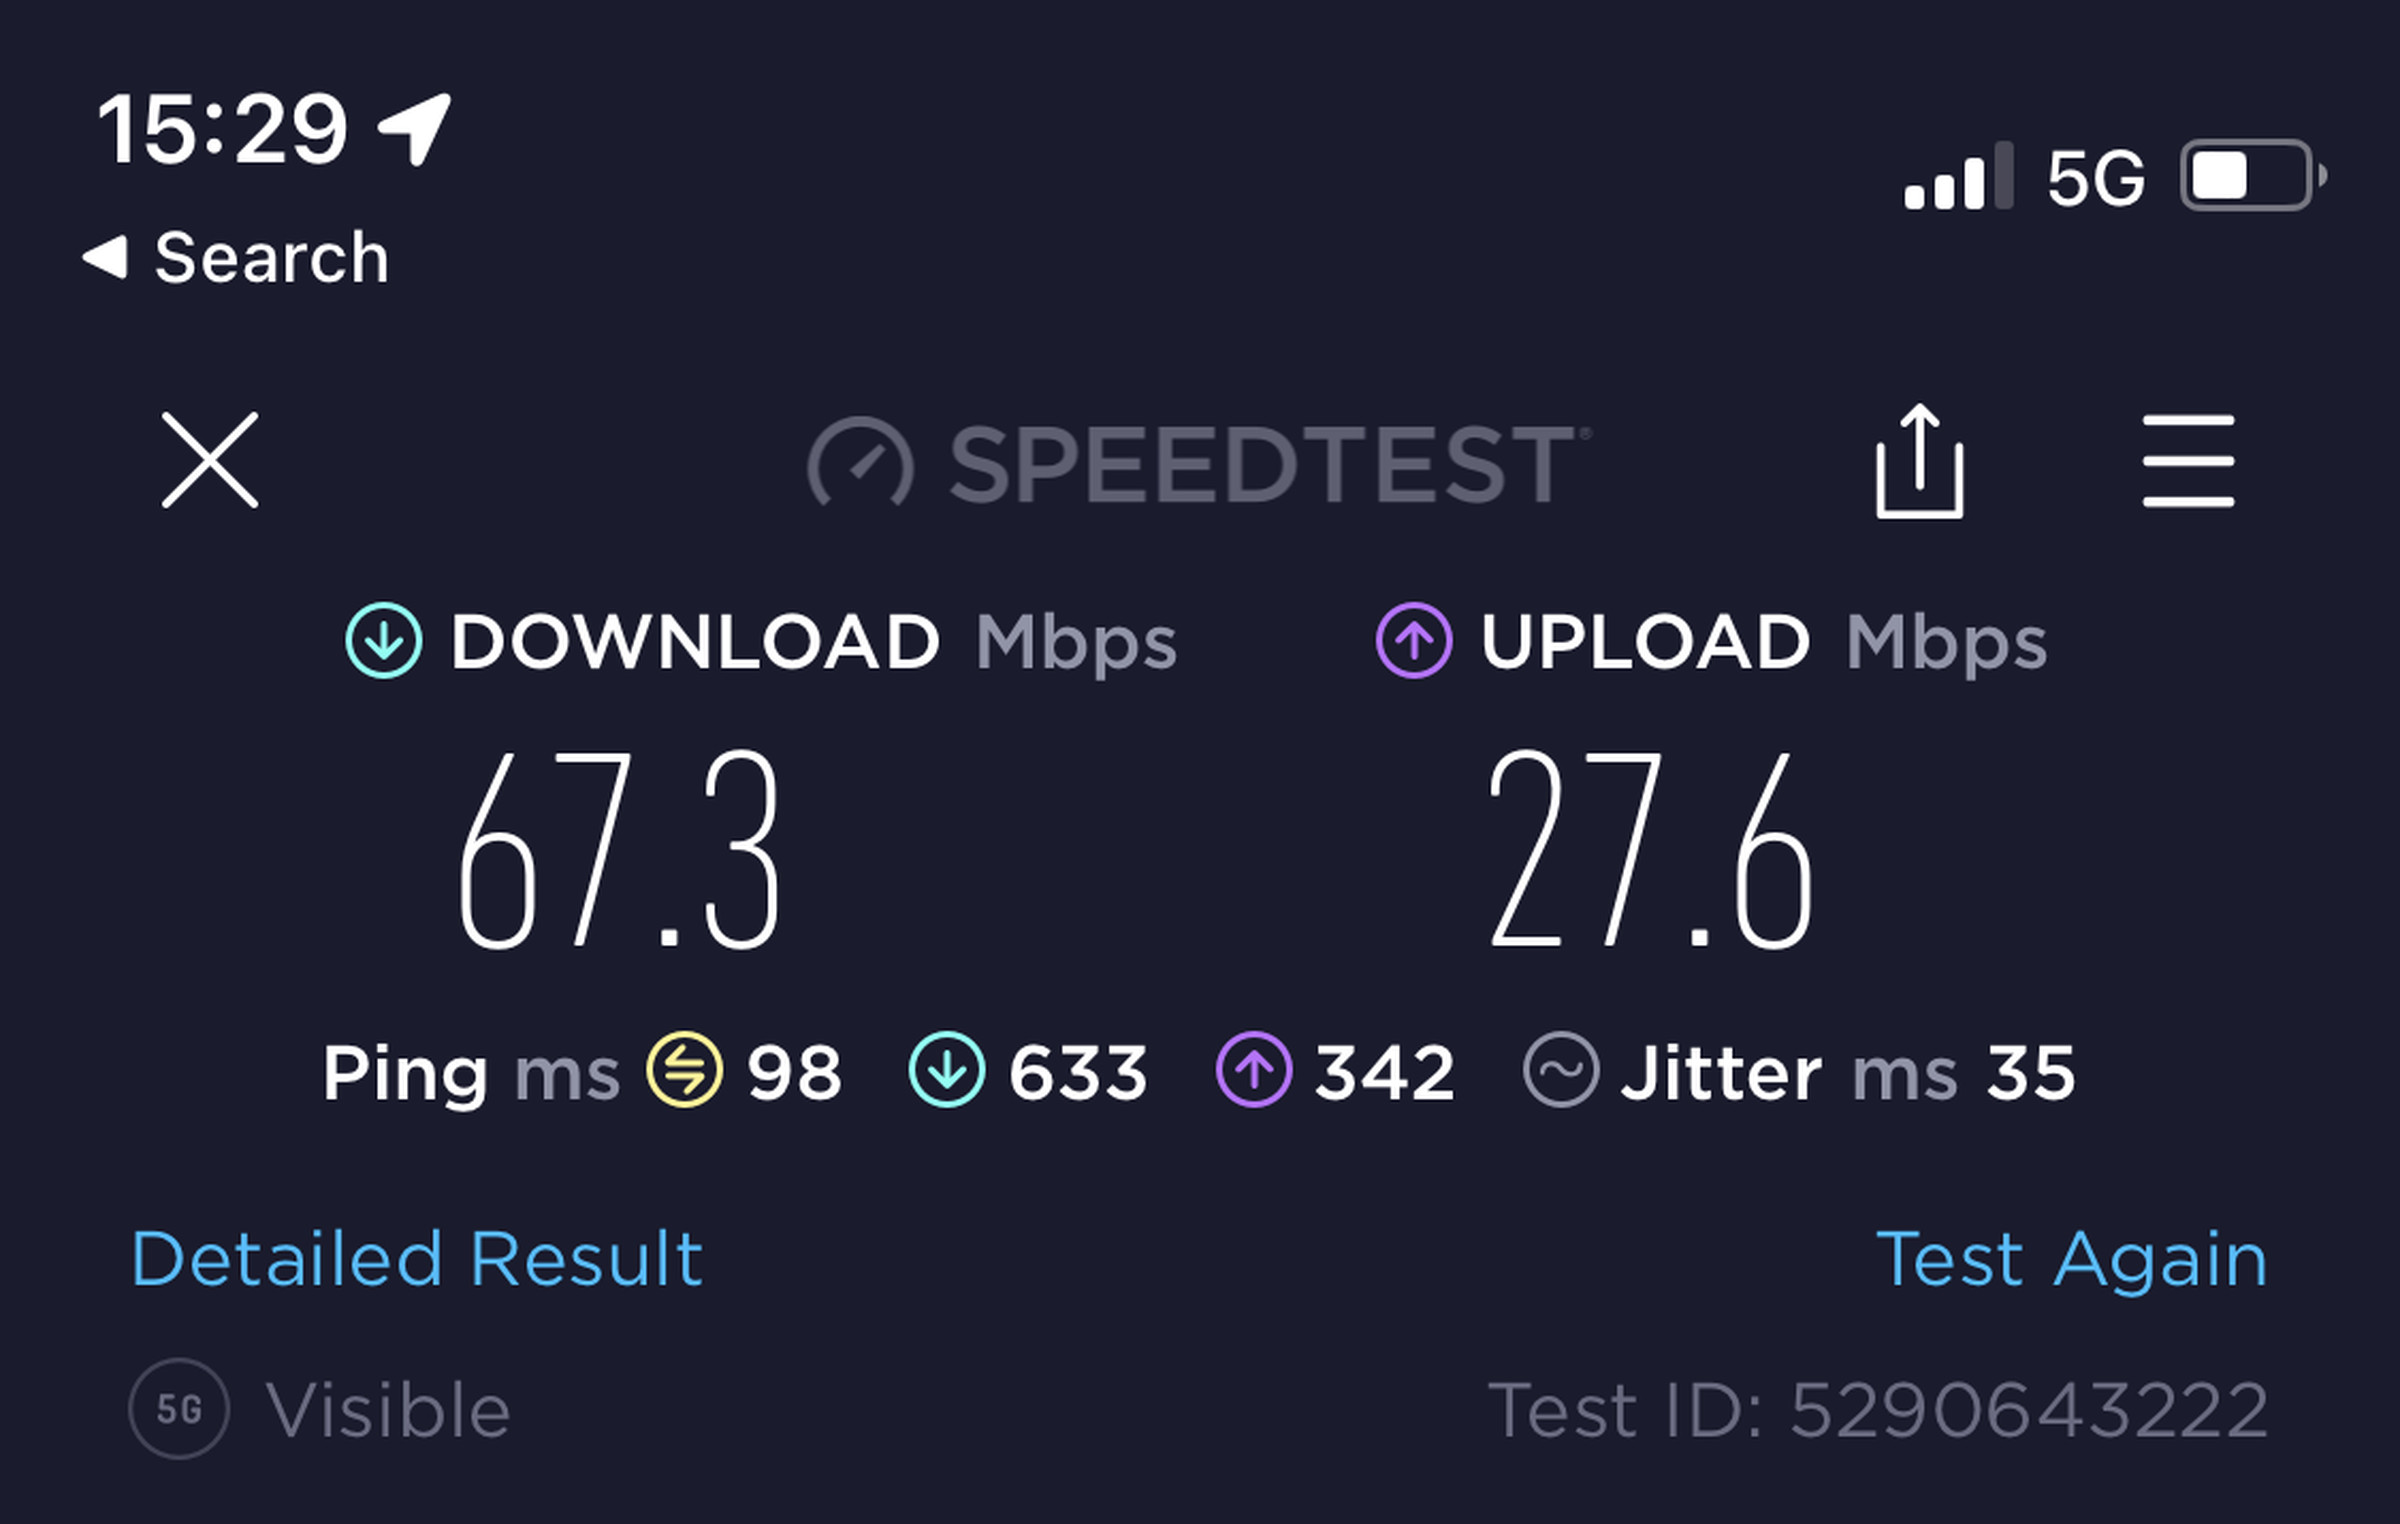 Screenshot of a speed test with a download speed of 67.3 Mbps, upload speed of 27.6 Mbps, and a 98 millisecond ping.